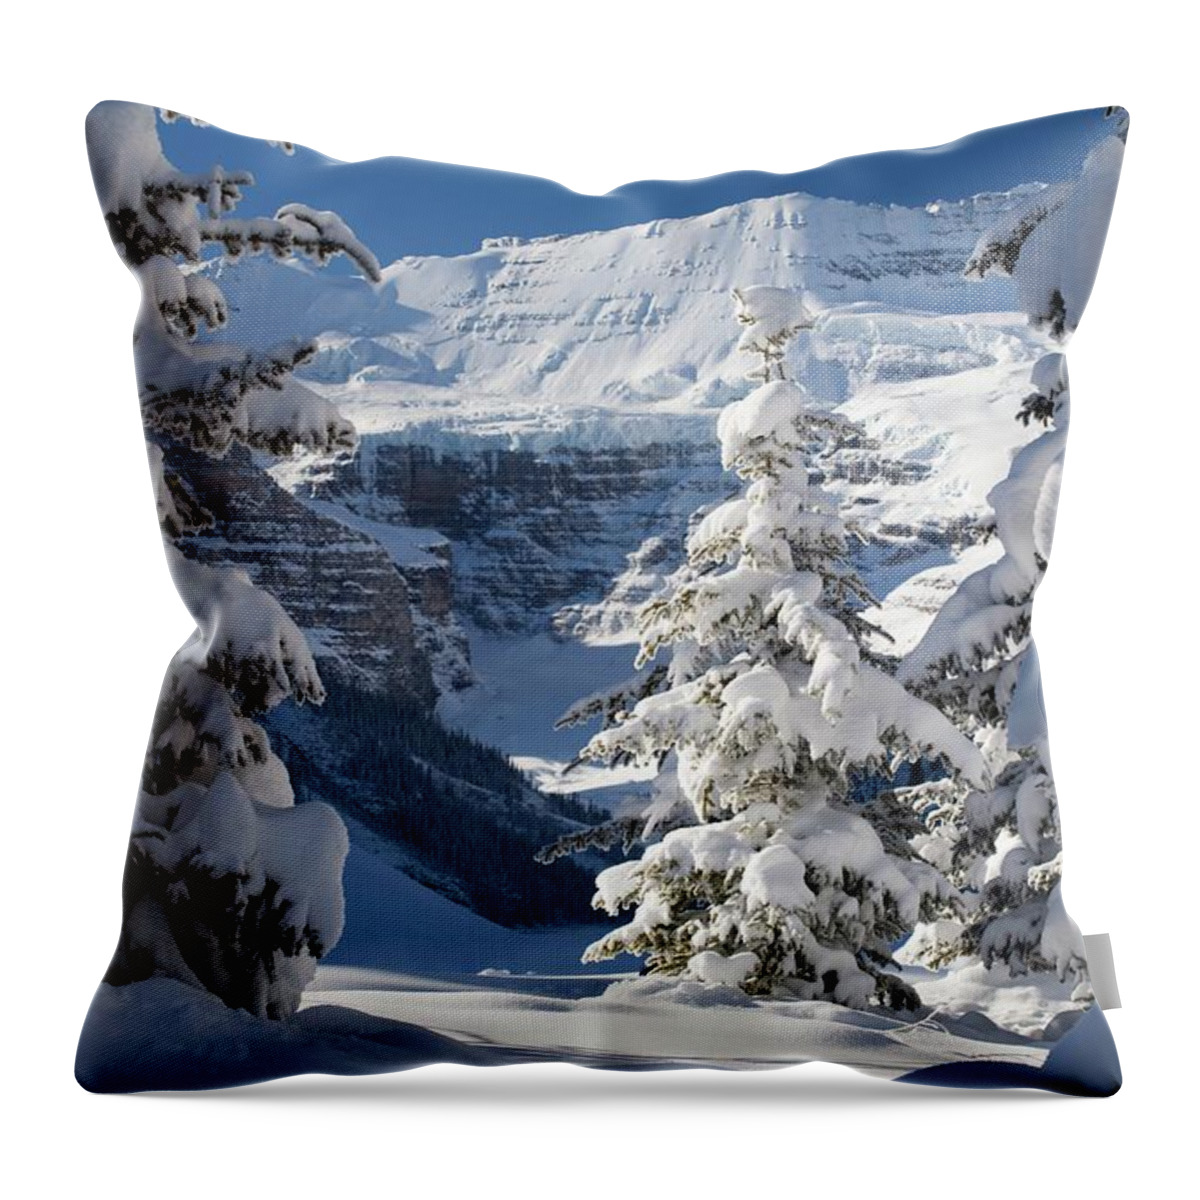 Scenics Throw Pillow featuring the photograph Snow Covered Mountain Framed By Snow by Design Pics / Michael Interisano